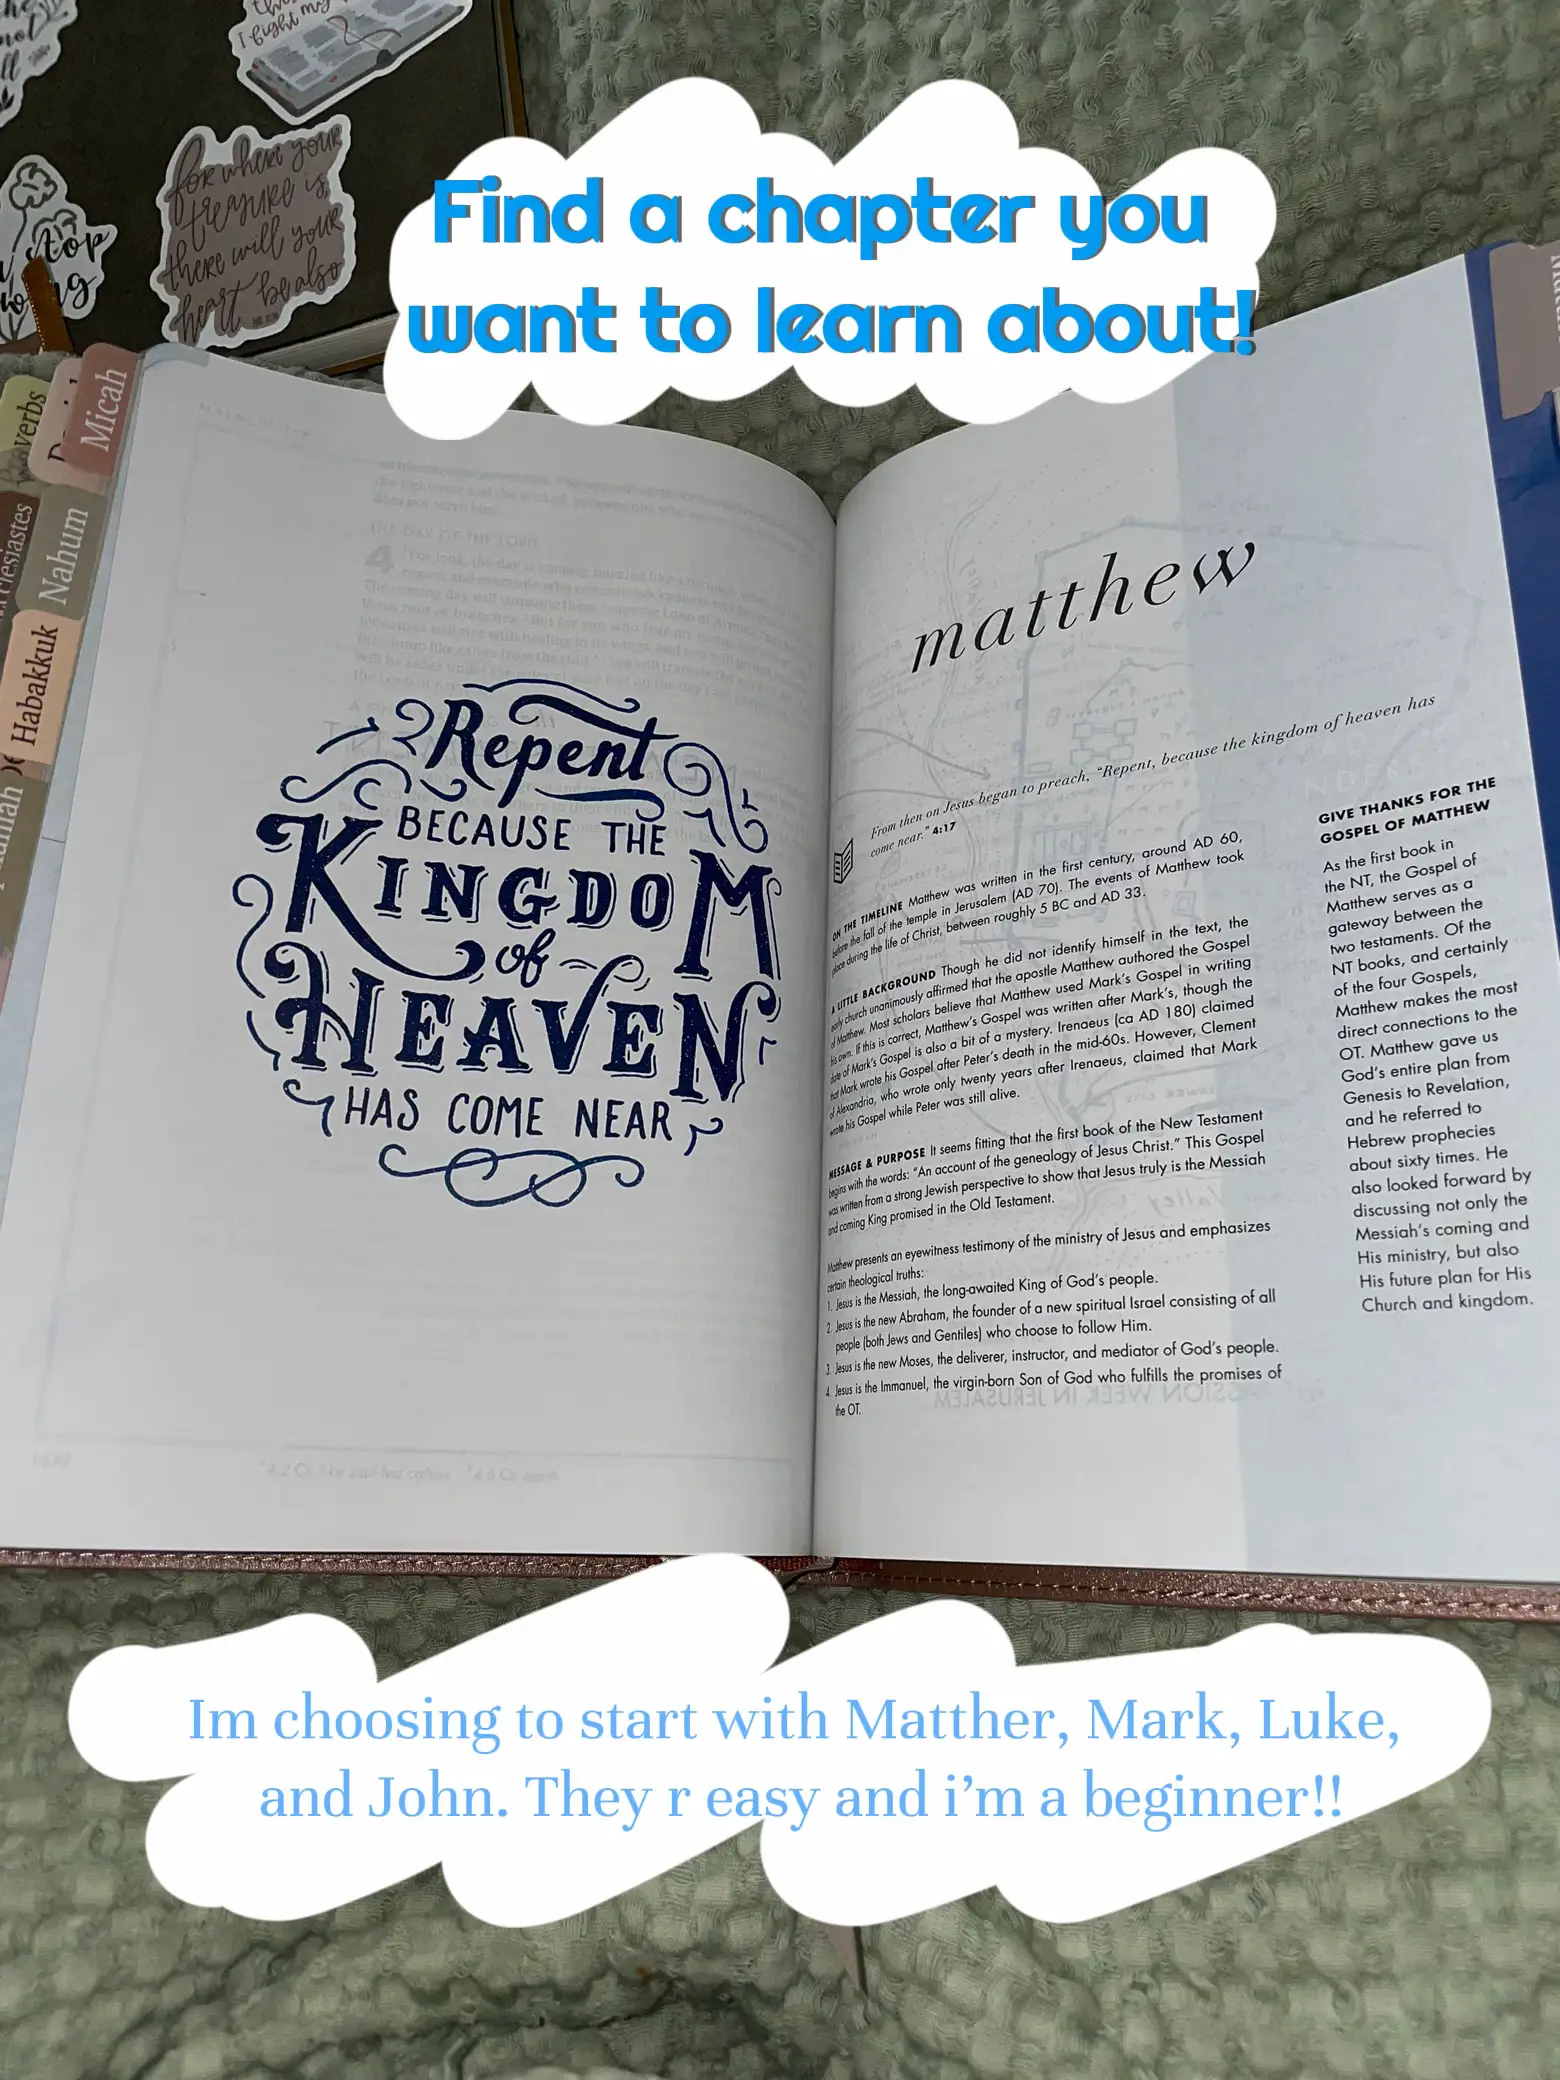  the book of Matthew, which is the first book of the Bible and is open to lớn a page with the words "Find a chapter you want to lớn learn about!". The book of Matthew is a